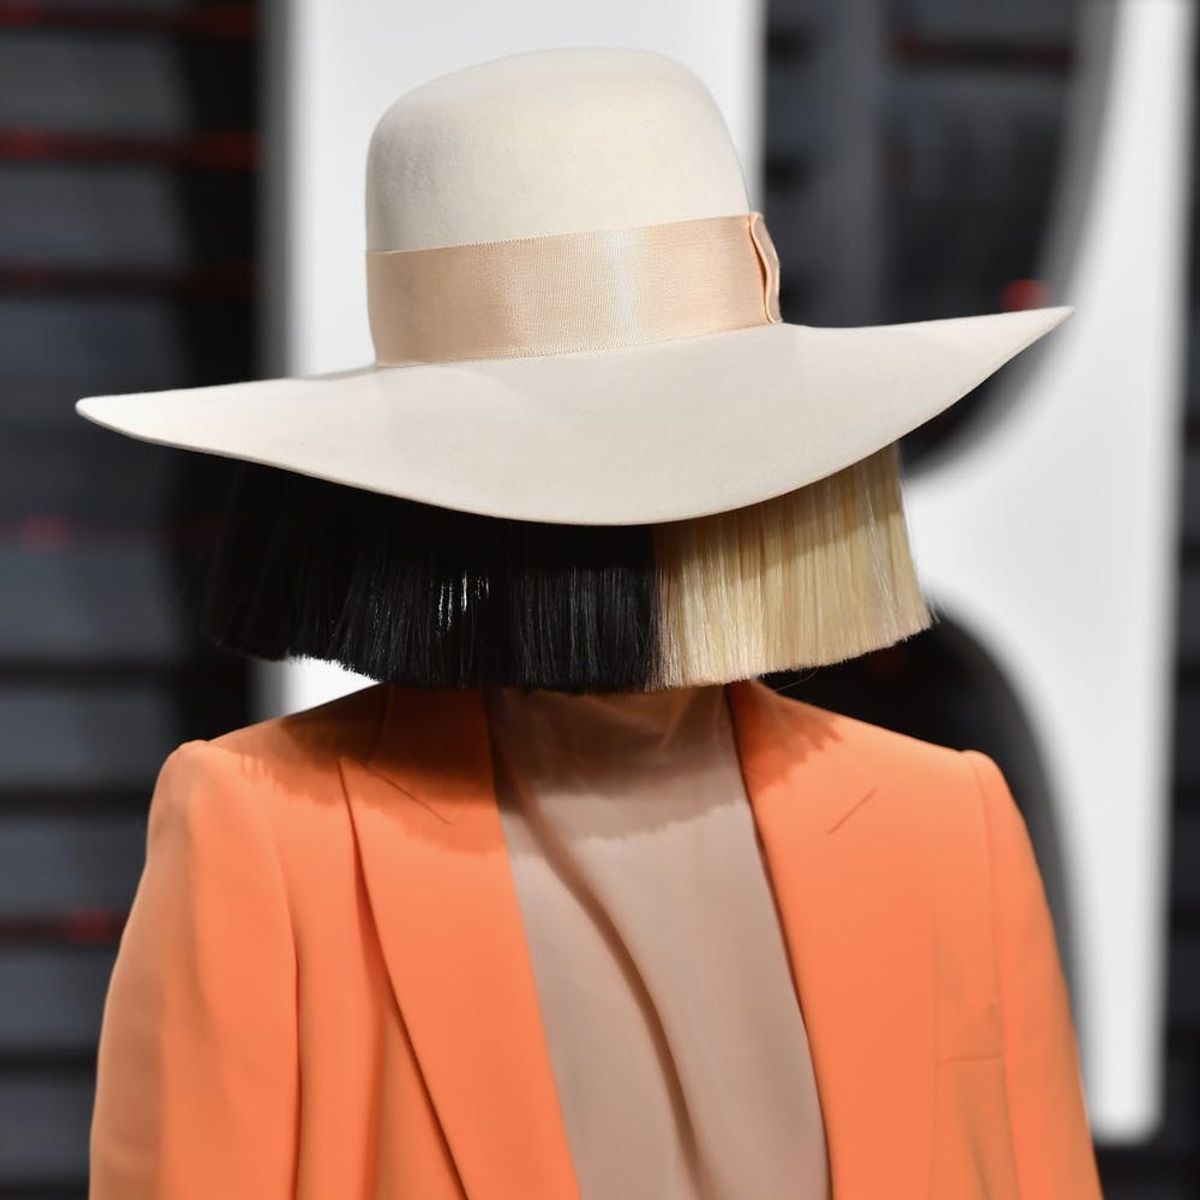 So This Is What Sia Looks Like Without Her Wig